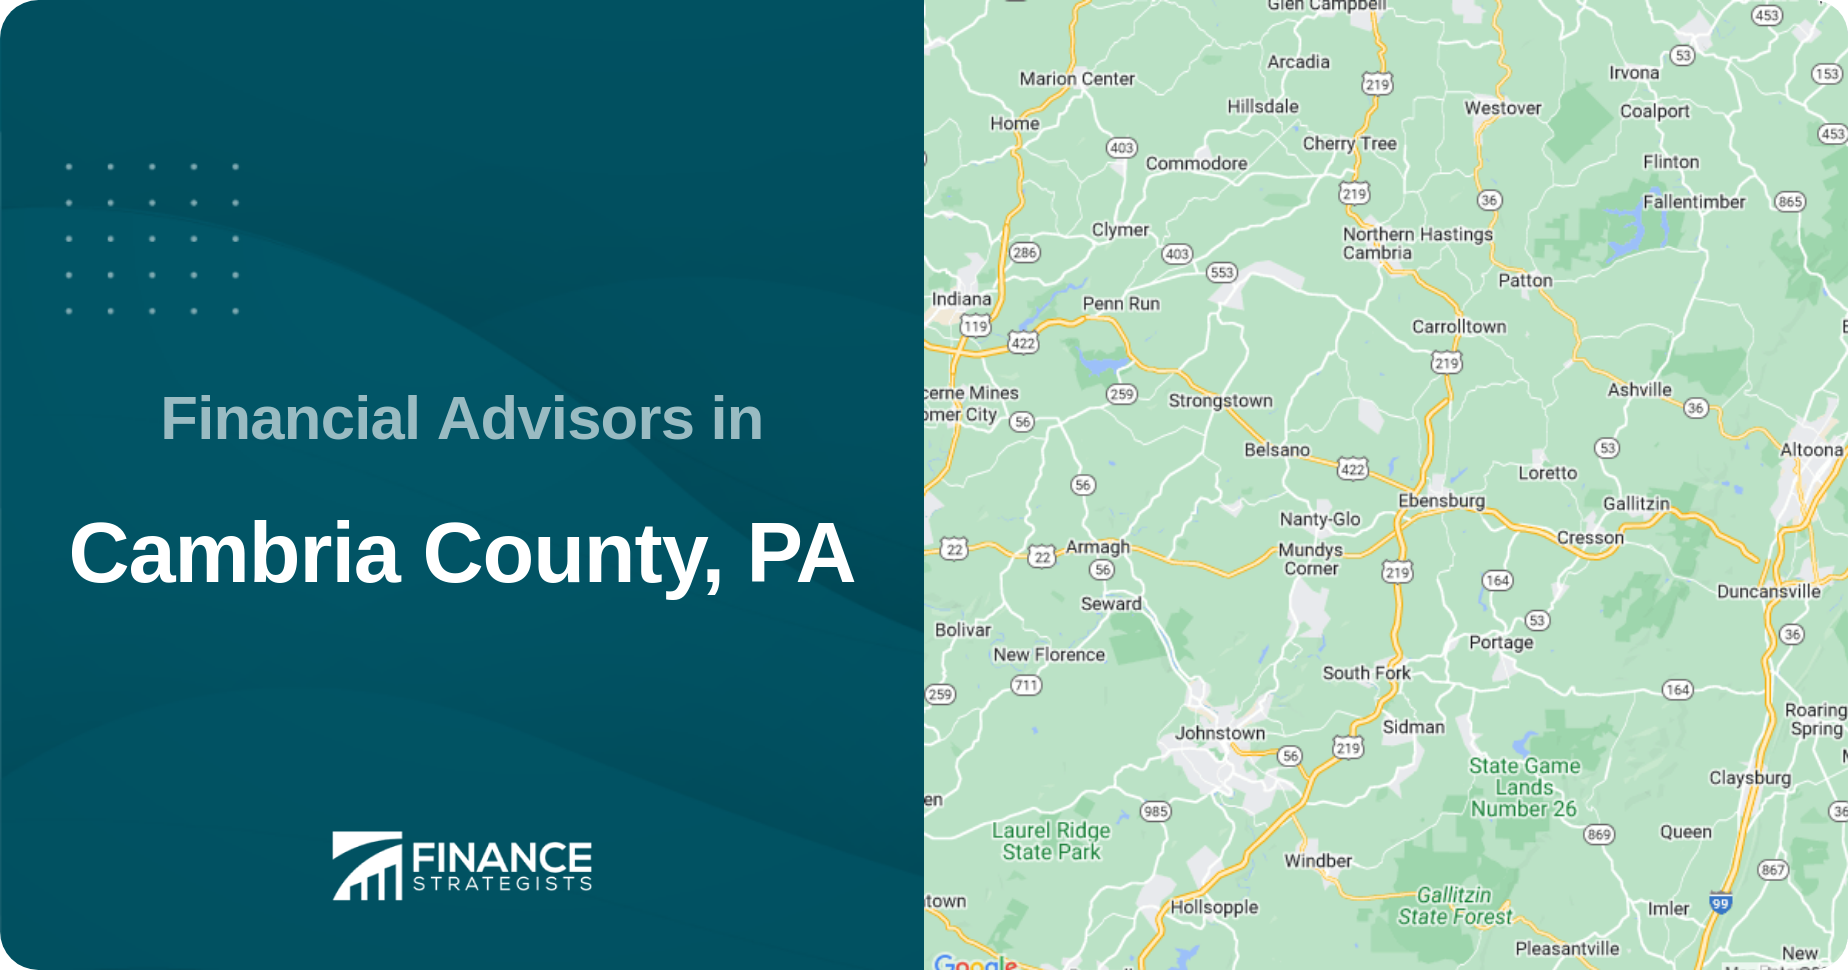 Financial Advisors in Cambria County, PA